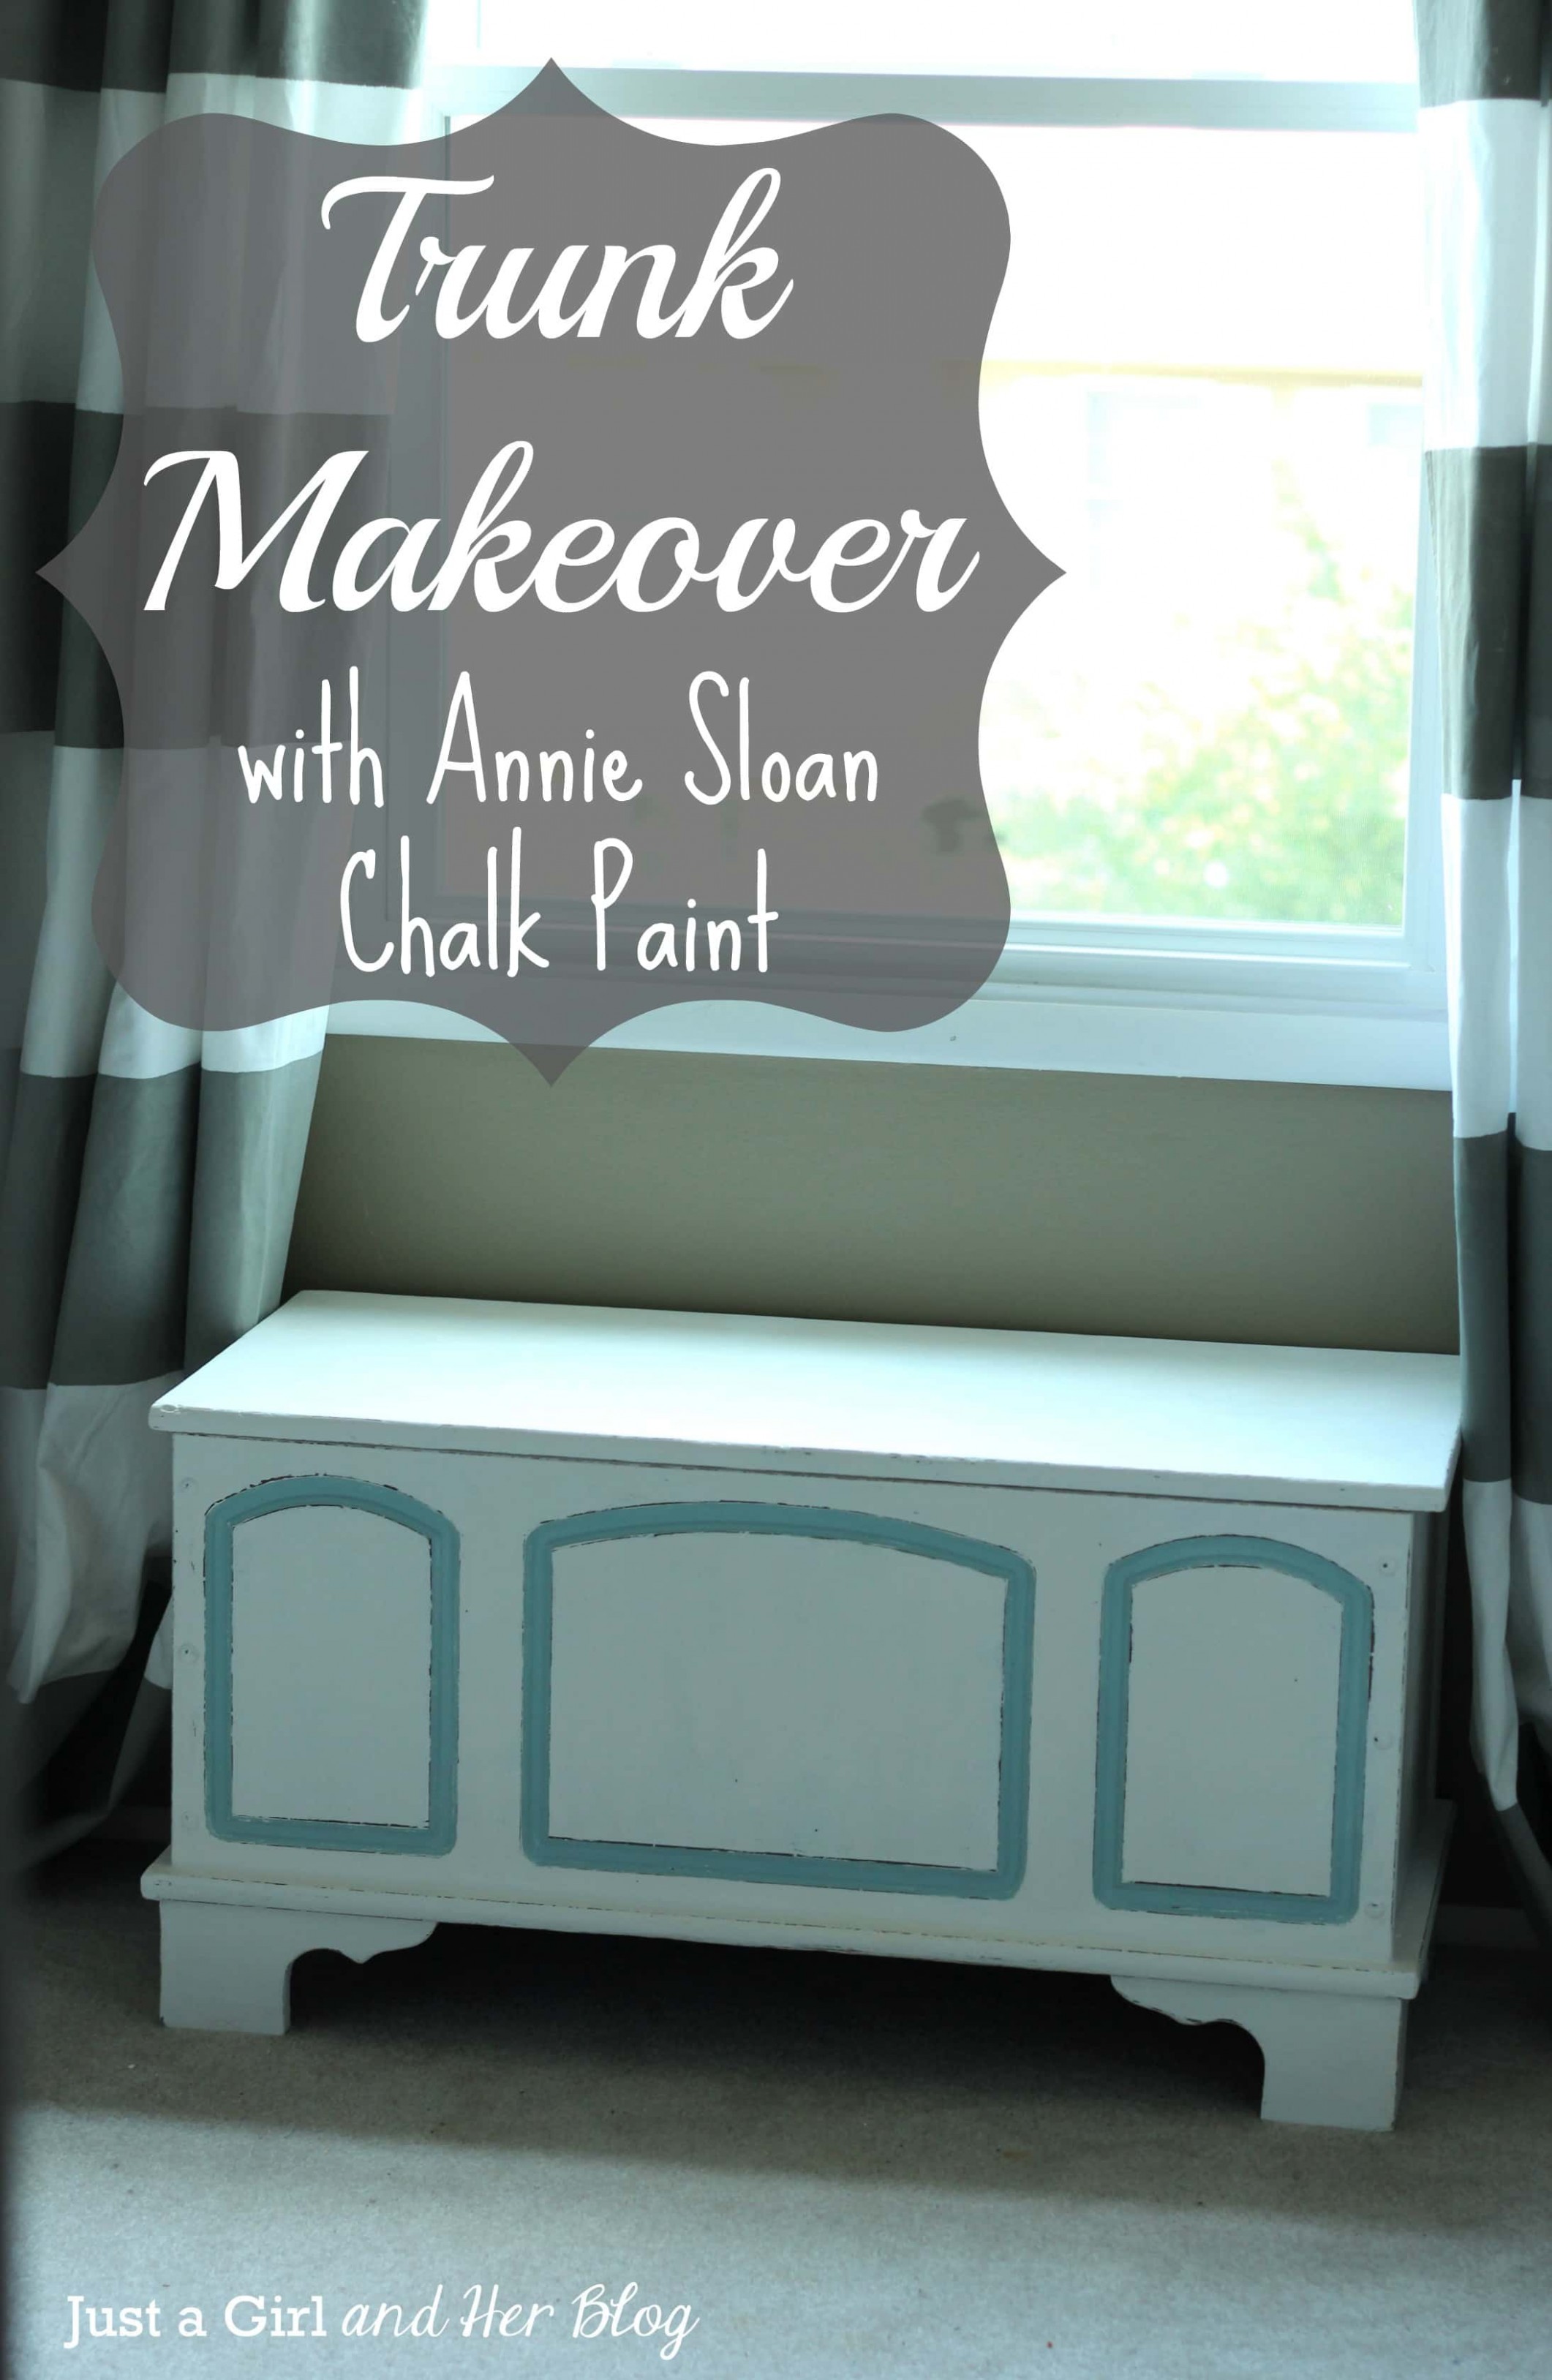 Trunk Makeover With Annie Sloan Chalk Paint | Abby Lawson Where To Find Annie Sloan Chalk Paint Near Me